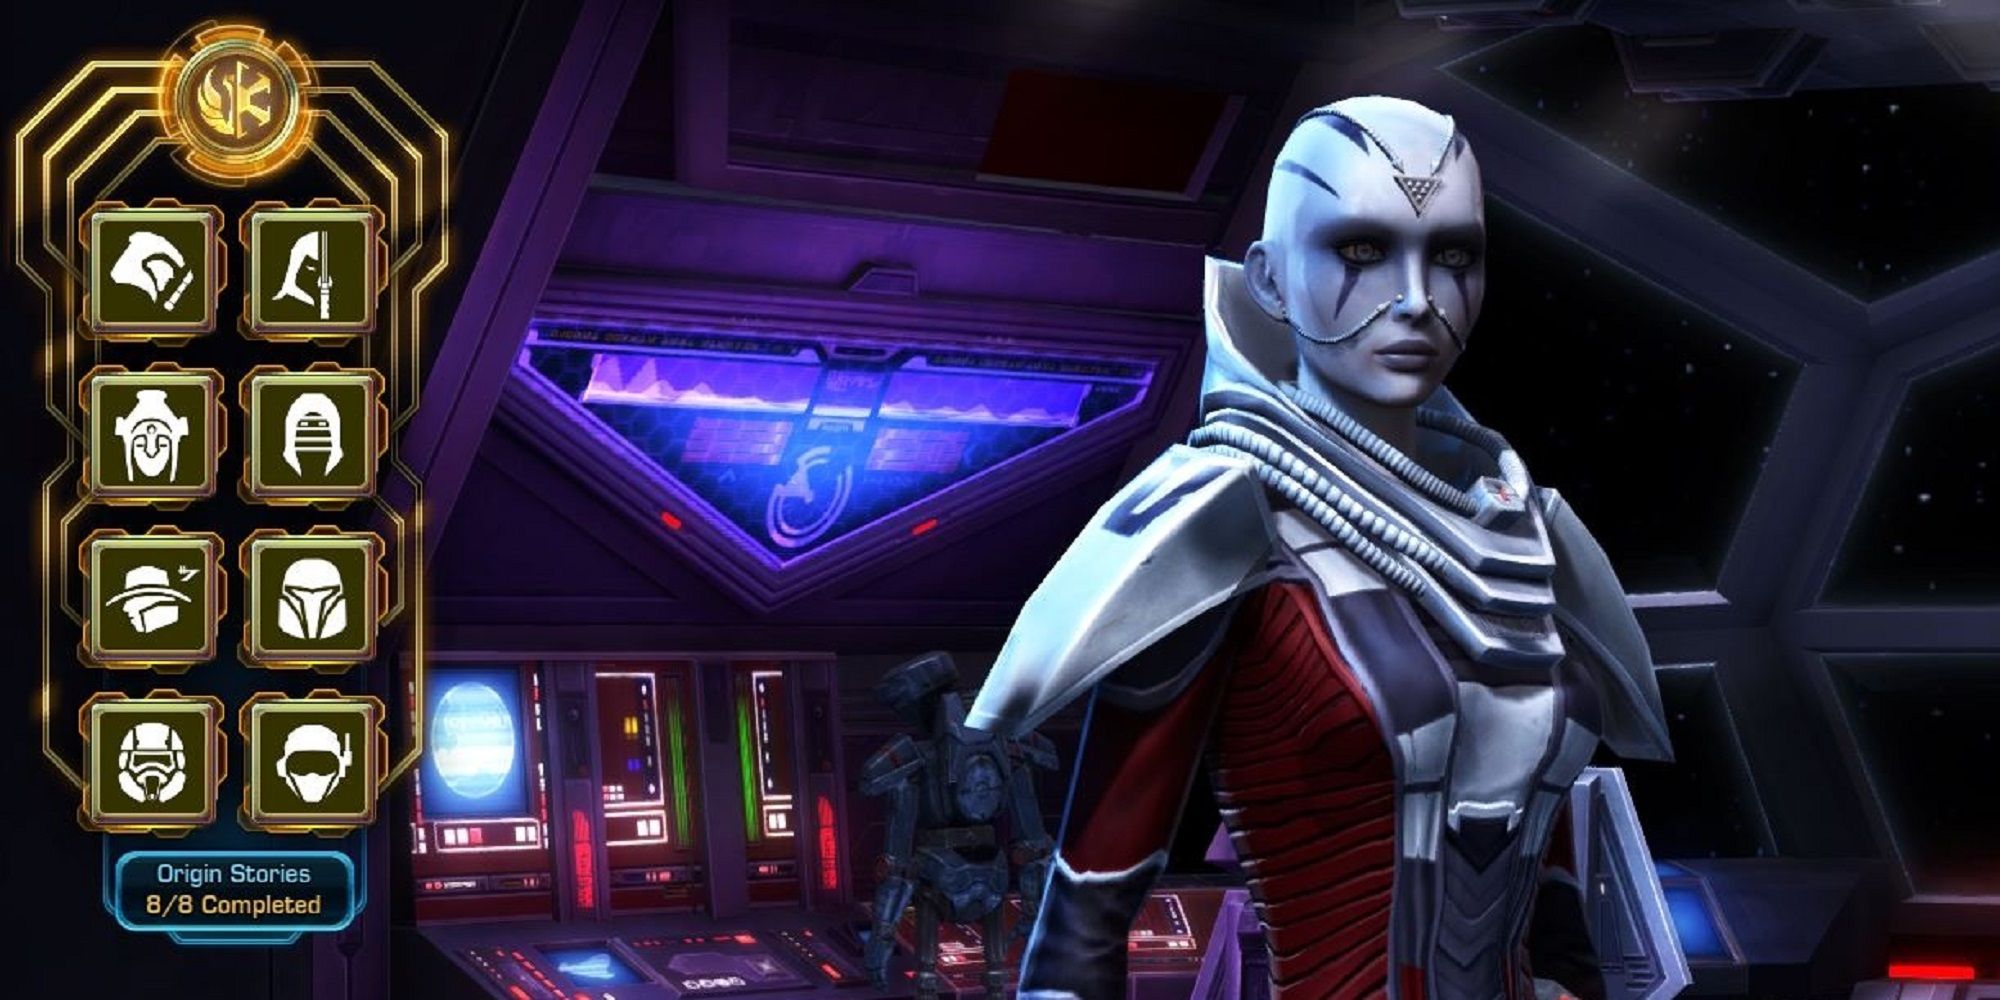 SWTOR class stories completion as shown on character screen